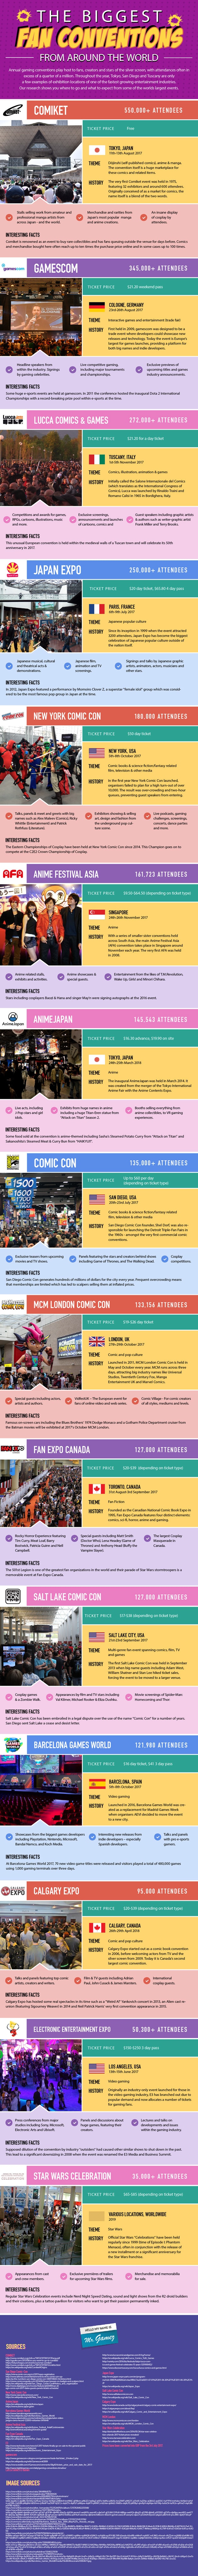 Fan Convention Info Graphic